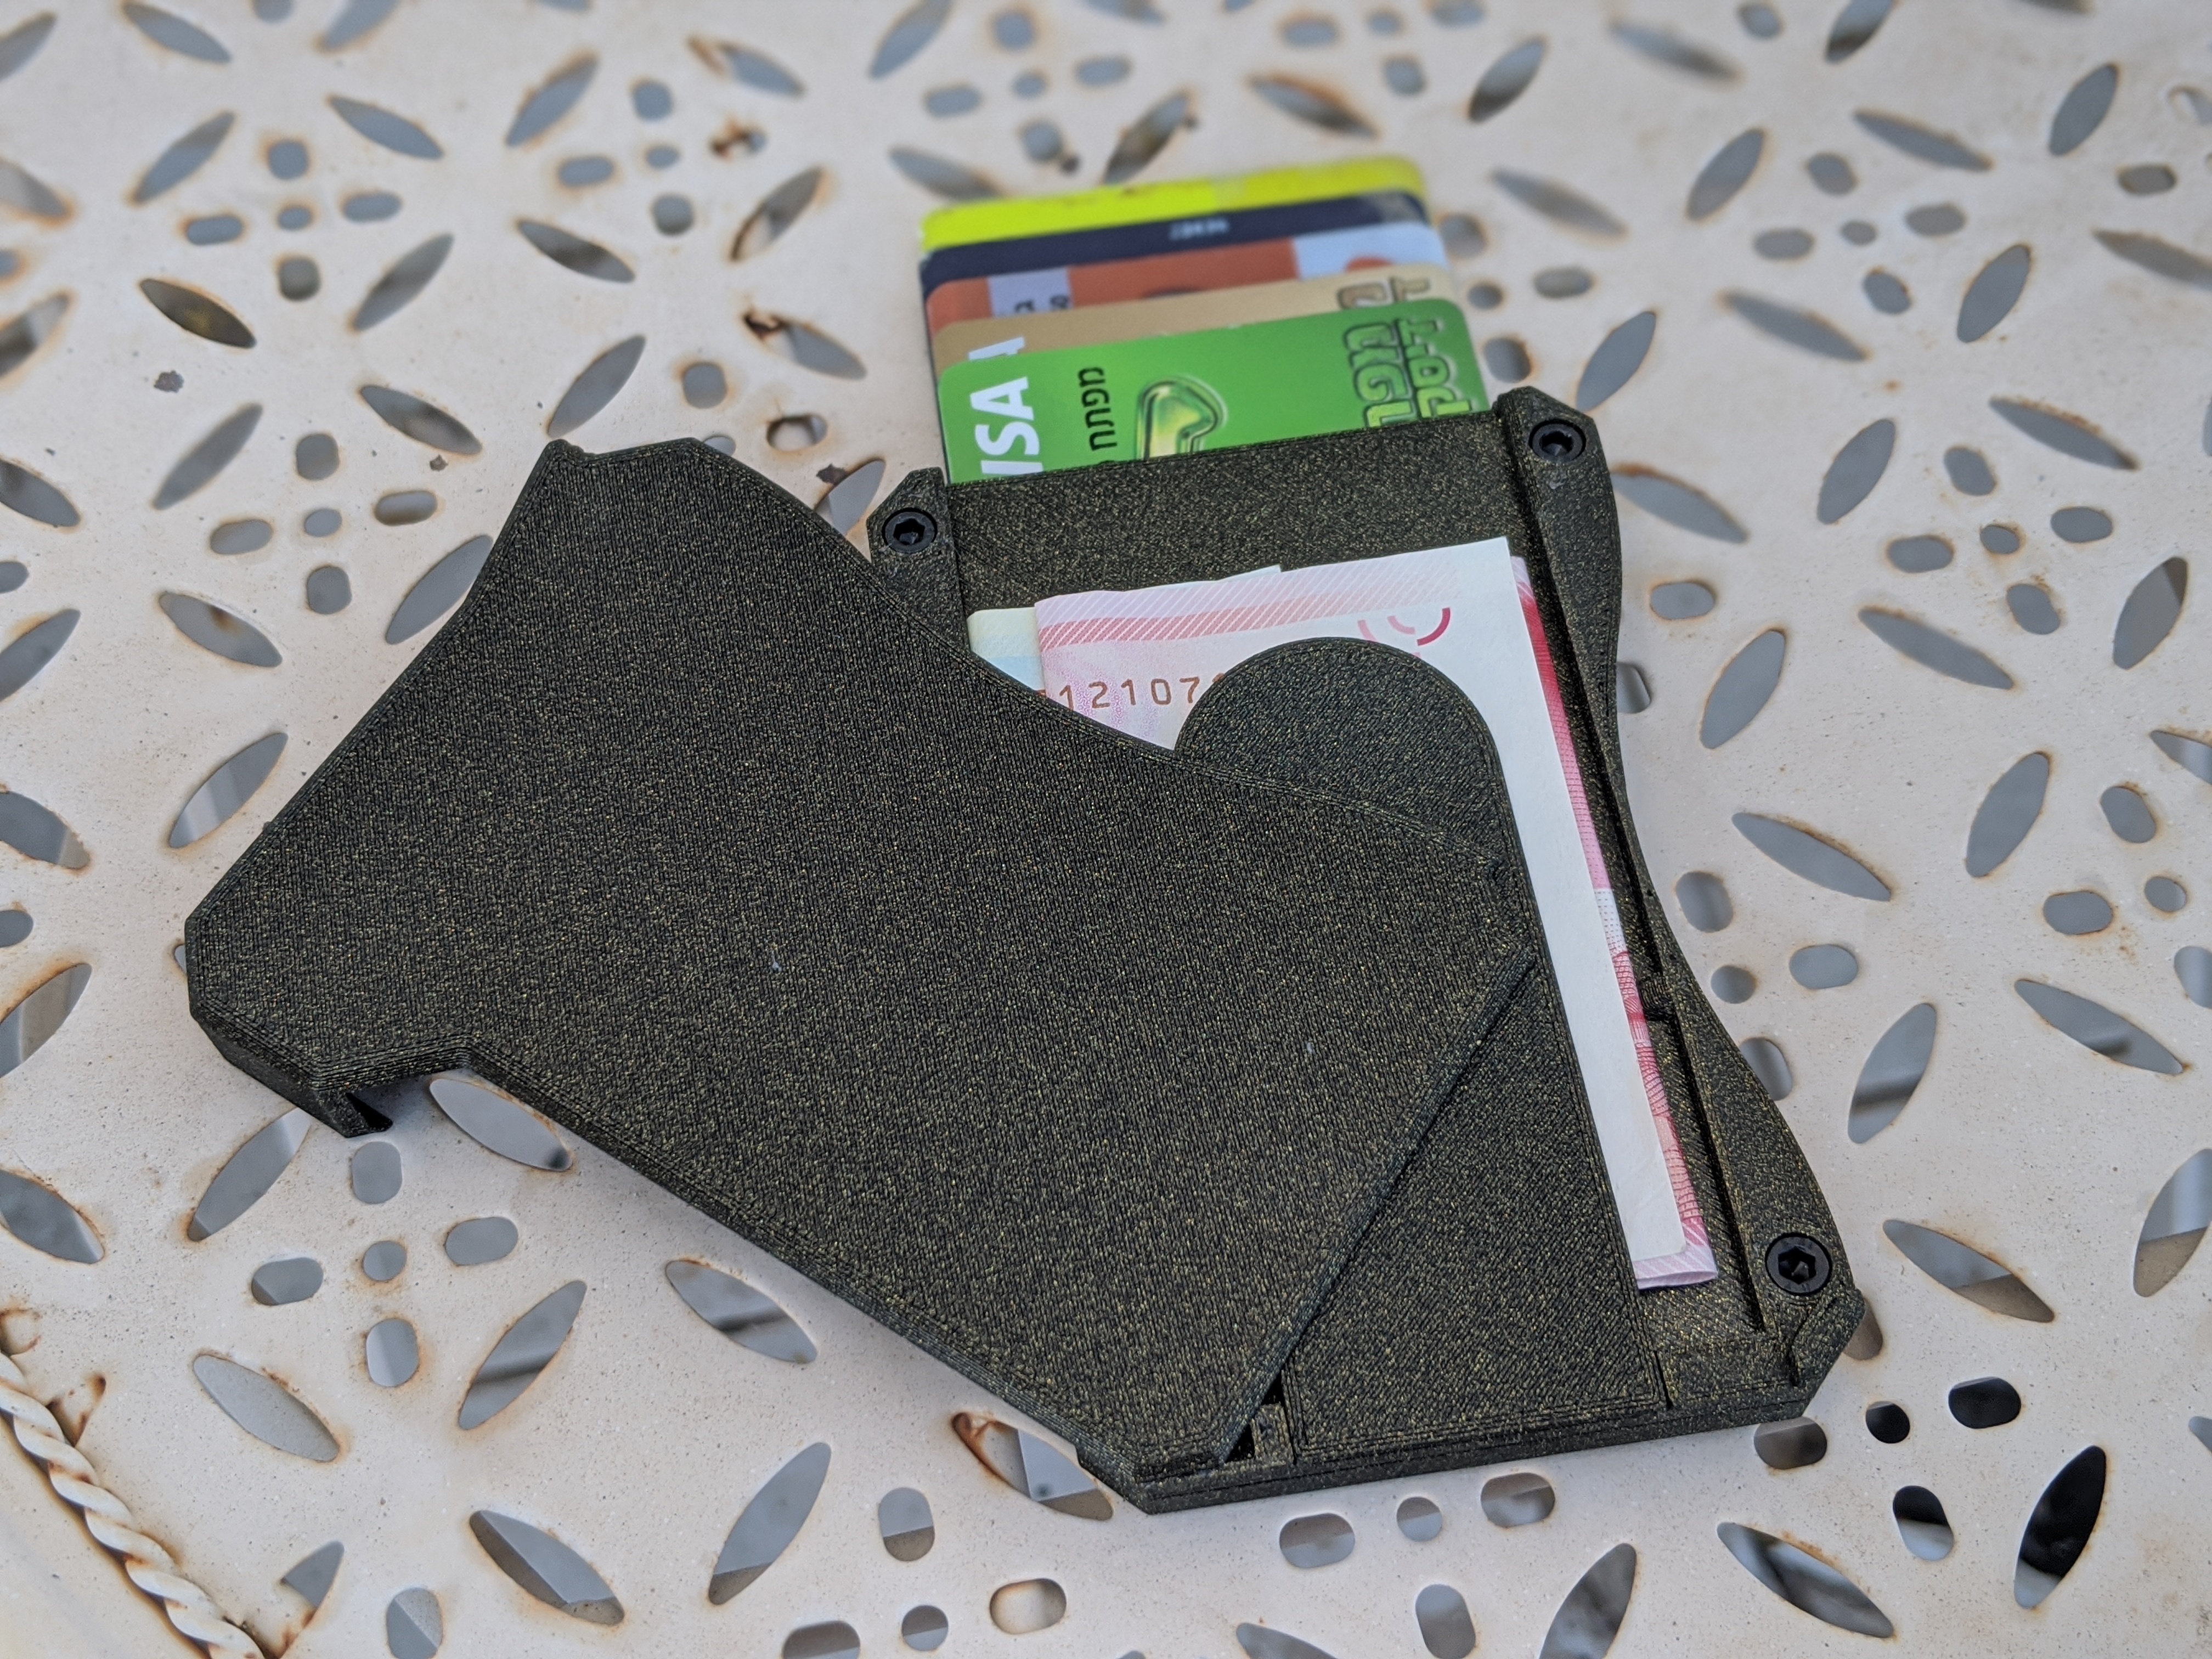 3D Printed "Smart" Wallet (Updated for M3 Bolts)